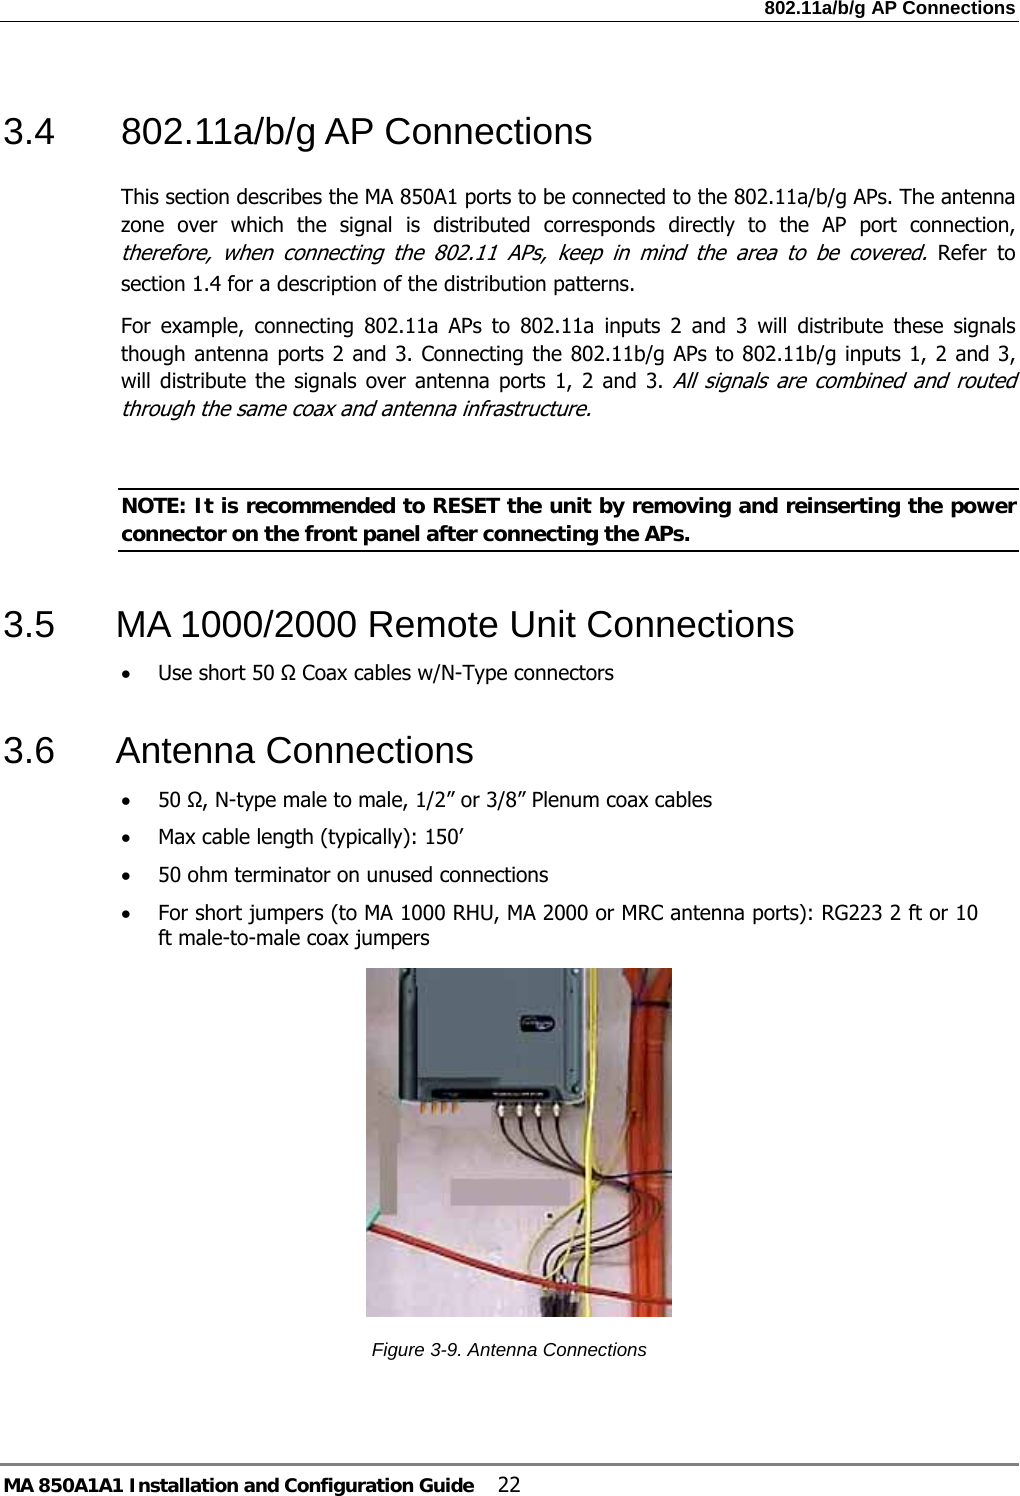 802.11a/b/g AP Connections MA 850A1A1 Installation and Configuration Guide  22 3.4 802.11a/b/g AP Connections This section describes the MA 850A1 ports to be connected to the 802.11a/b/g APs. The antenna zone over which the signal is distributed corresponds directly to the AP port connection, therefore, when connecting the 802.11 APs, keep in mind the area to be covered. Refer to section  1.4 for a description of the distribution patterns. For example, connecting 802.11a APs to 802.11a inputs 2 and 3 will distribute these signals though antenna ports 2 and 3. Connecting the 802.11b/g APs to 802.11b/g inputs 1, 2 and 3, will distribute the signals over antenna ports 1, 2 and 3. All signals are combined and routed through the same coax and antenna infrastructure.   NOTE: It is recommended to RESET the unit by removing and reinserting the power connector on the front panel after connecting the APs.  3.5  MA 1000/2000 Remote Unit Connections • Use short 50 Ω Coax cables w/N-Type connectors 3.6 Antenna Connections • 50 Ω, N-type male to male, 1/2” or 3/8” Plenum coax cables • Max cable length (typically): 150’ • 50 ohm terminator on unused connections • For short jumpers (to MA 1000 RHU, MA 2000 or MRC antenna ports): RG223 2 ft or 10 ft male-to-male coax jumpers      Figure  3-9. Antenna Connections  